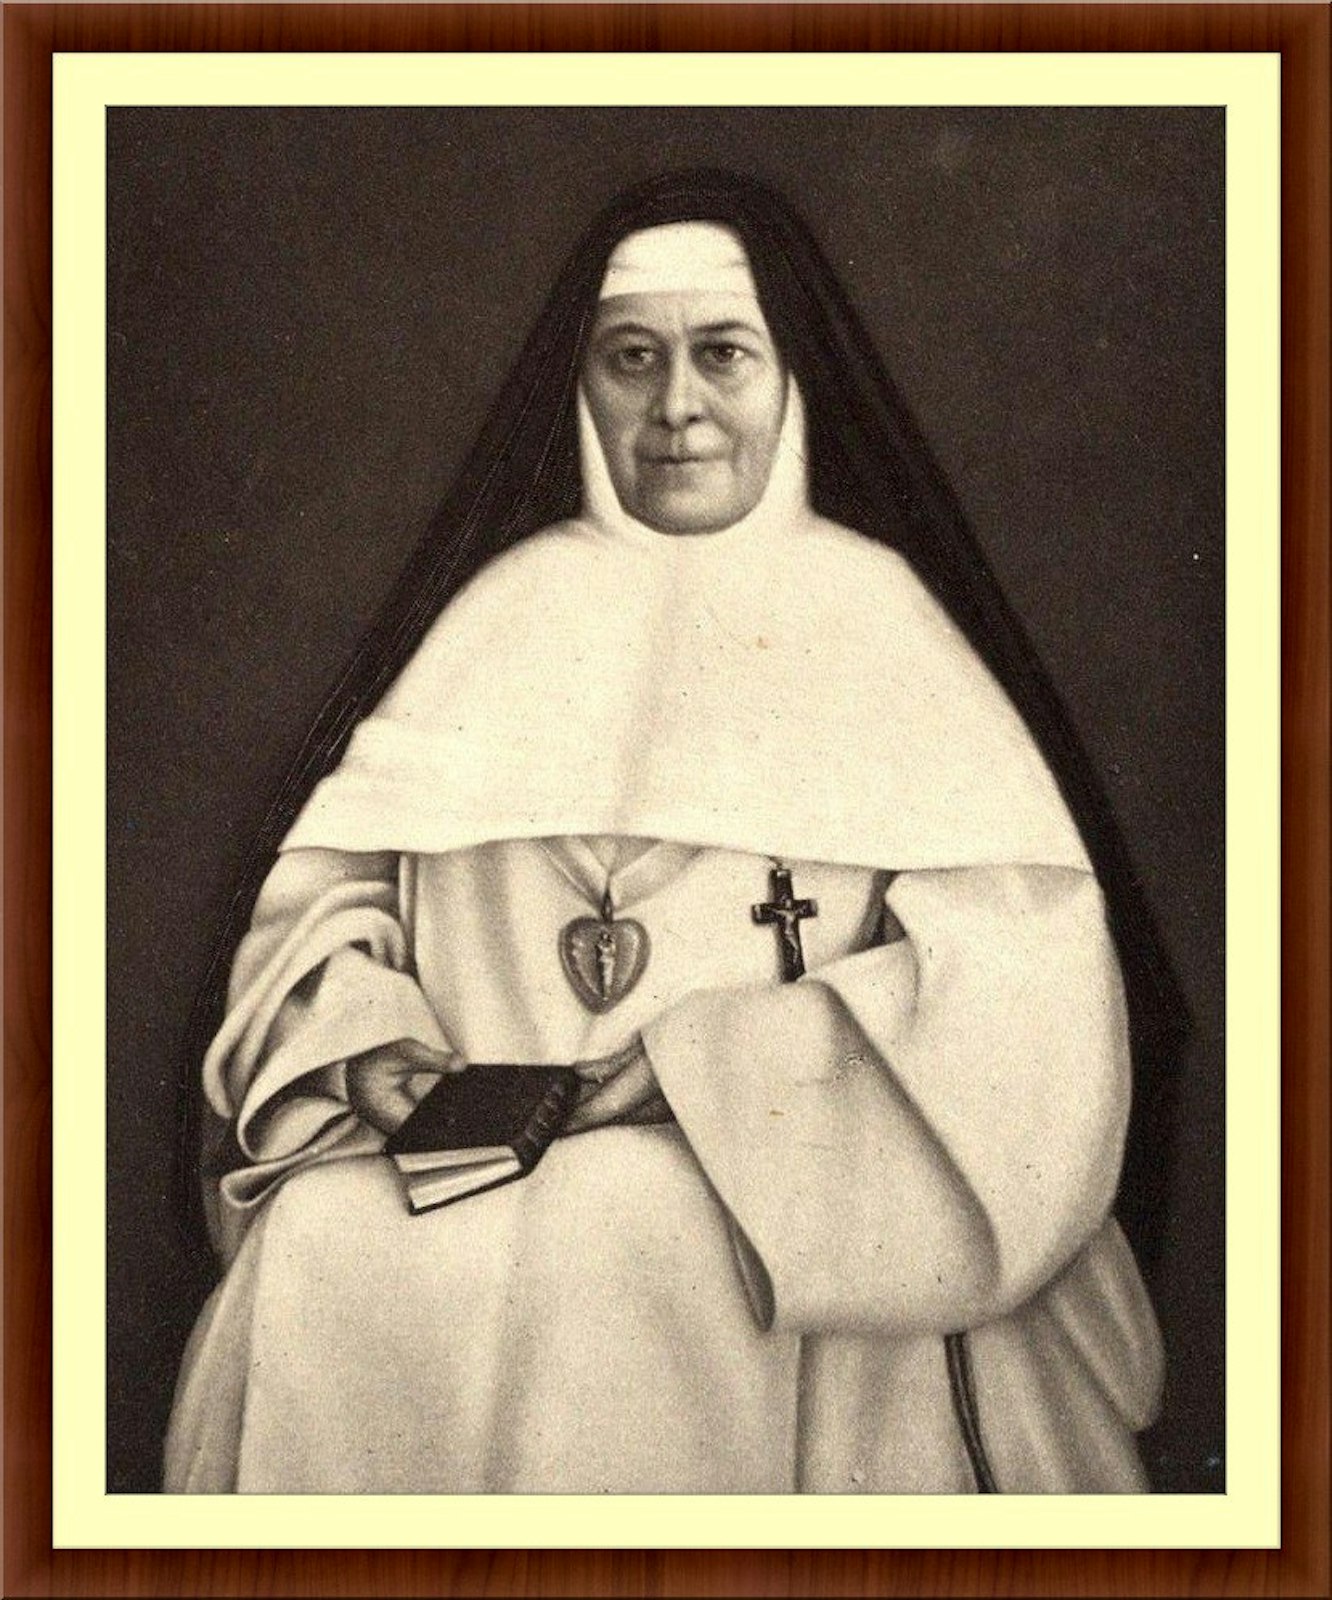 Sr. Mary Euphrasia, the foundress of the Sisters of the Good Shepherd. Sr. Euphrasia was canonized in May 1940 by Pope Pius XII.